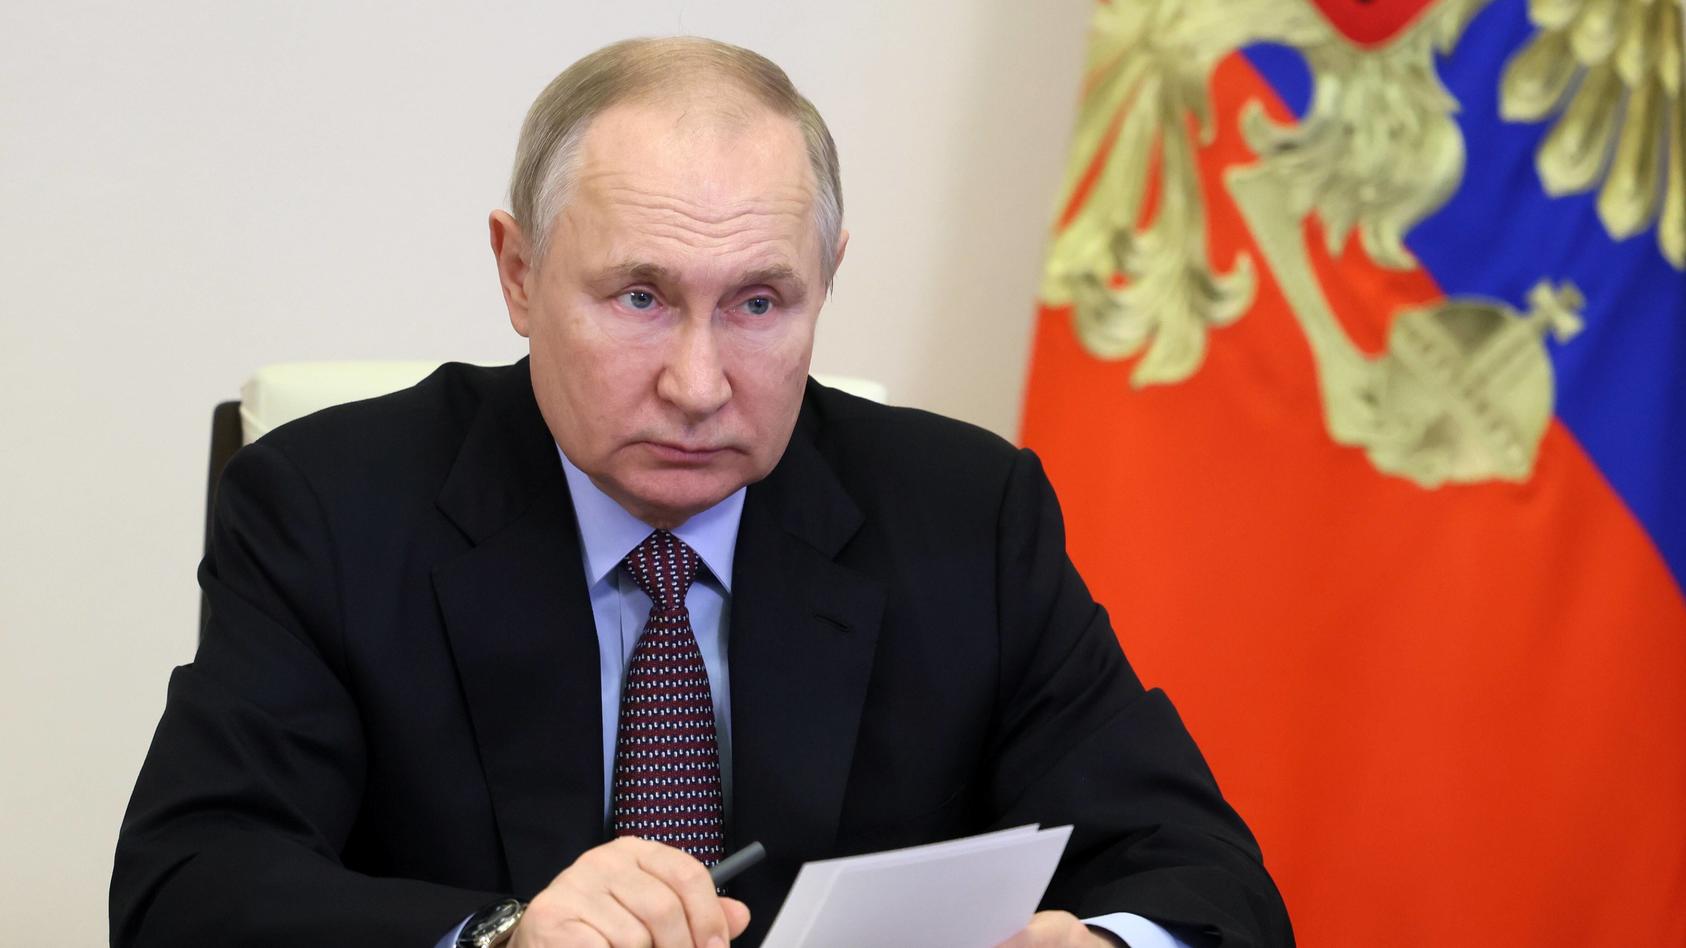  Russia Putin Transport Infrastructure 8338342 13.12.2022 Russian President Vladimir Putin takes part in a ceremony to launch new and renovated transport infrastructure in Russia s regions via a video link at the Novo-Ogaryovo state residence, outsid